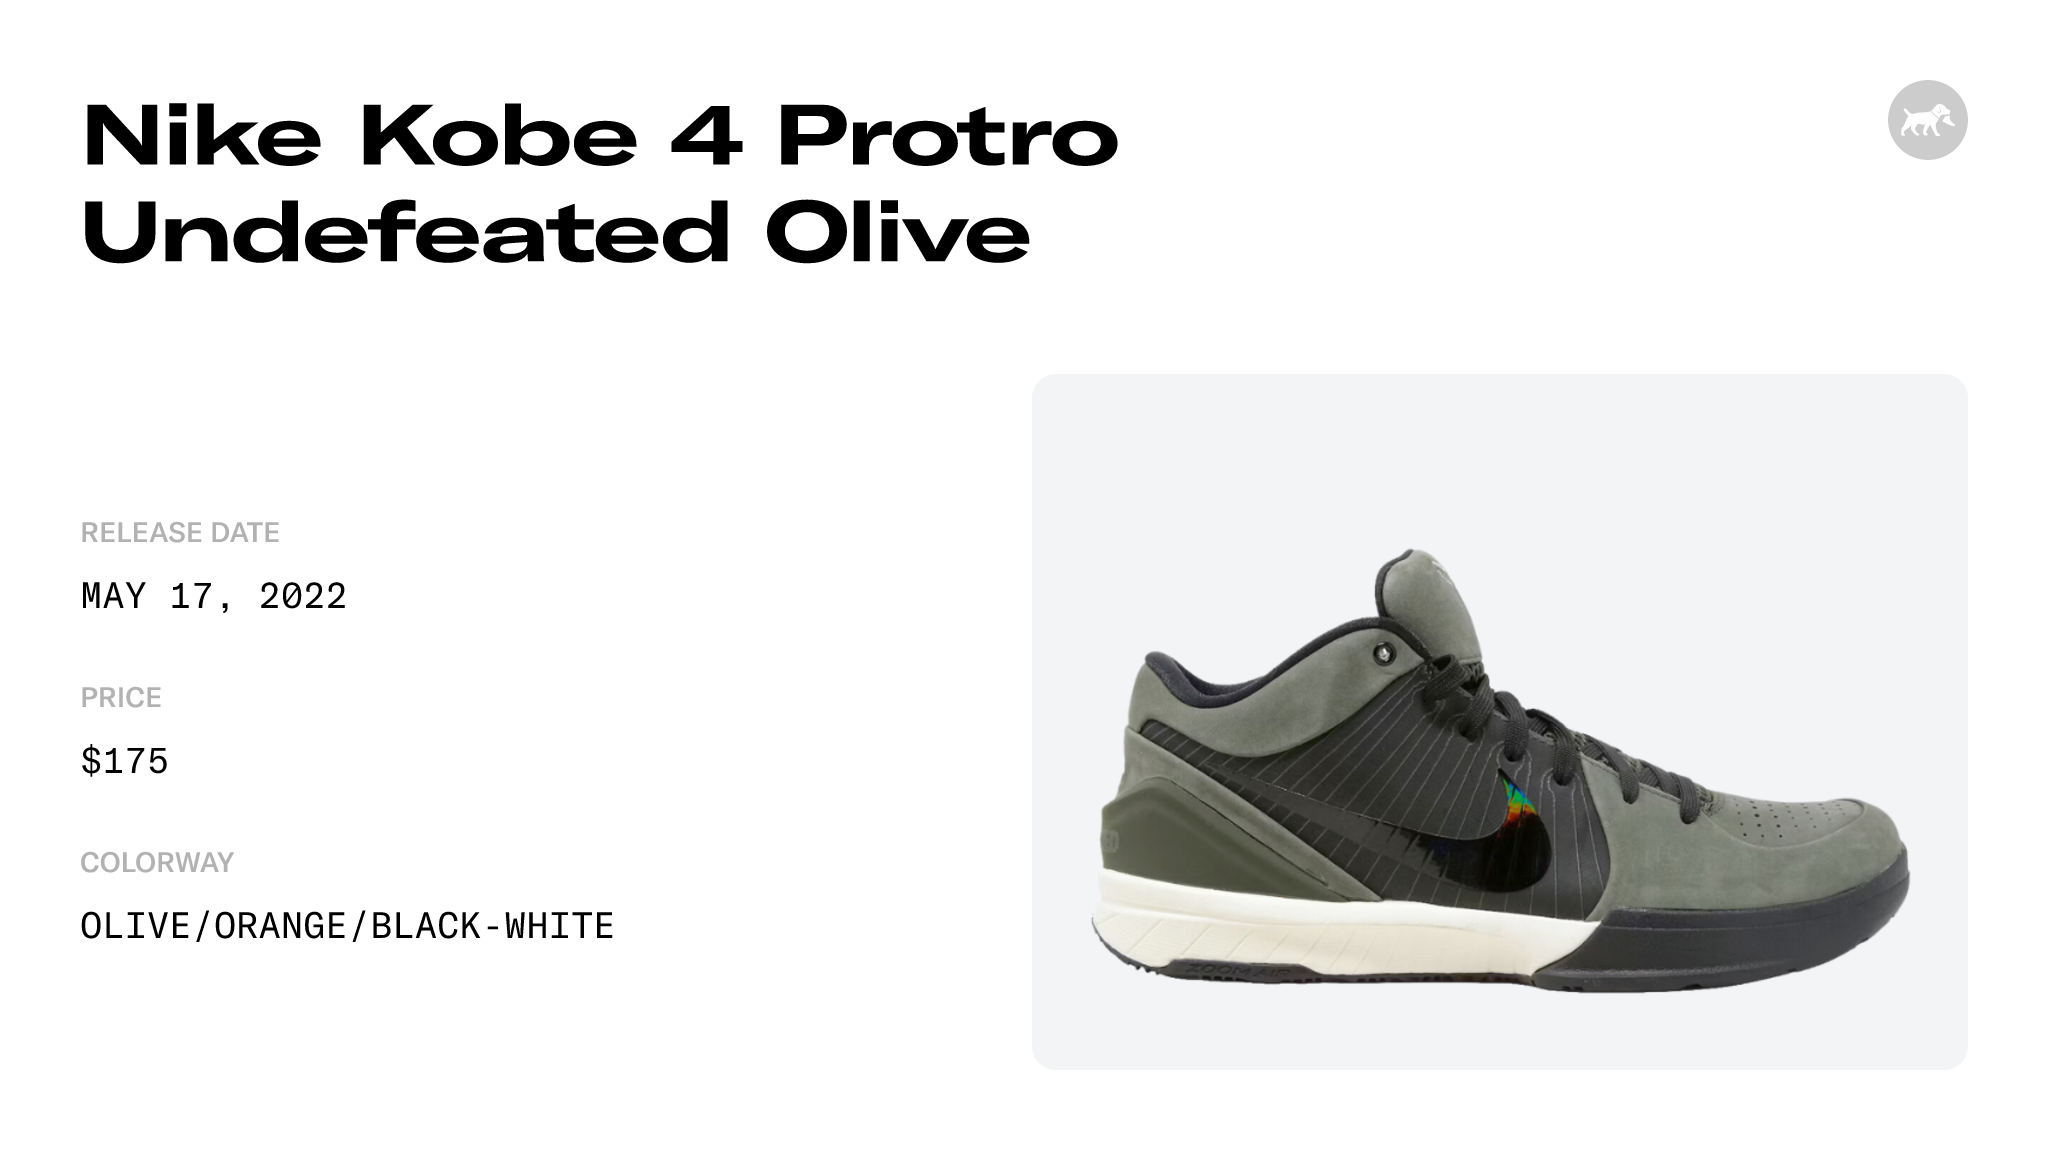 Nike Kobe 4 Protro Undefeated Olive - CK2597-300 Raffles and Release Date